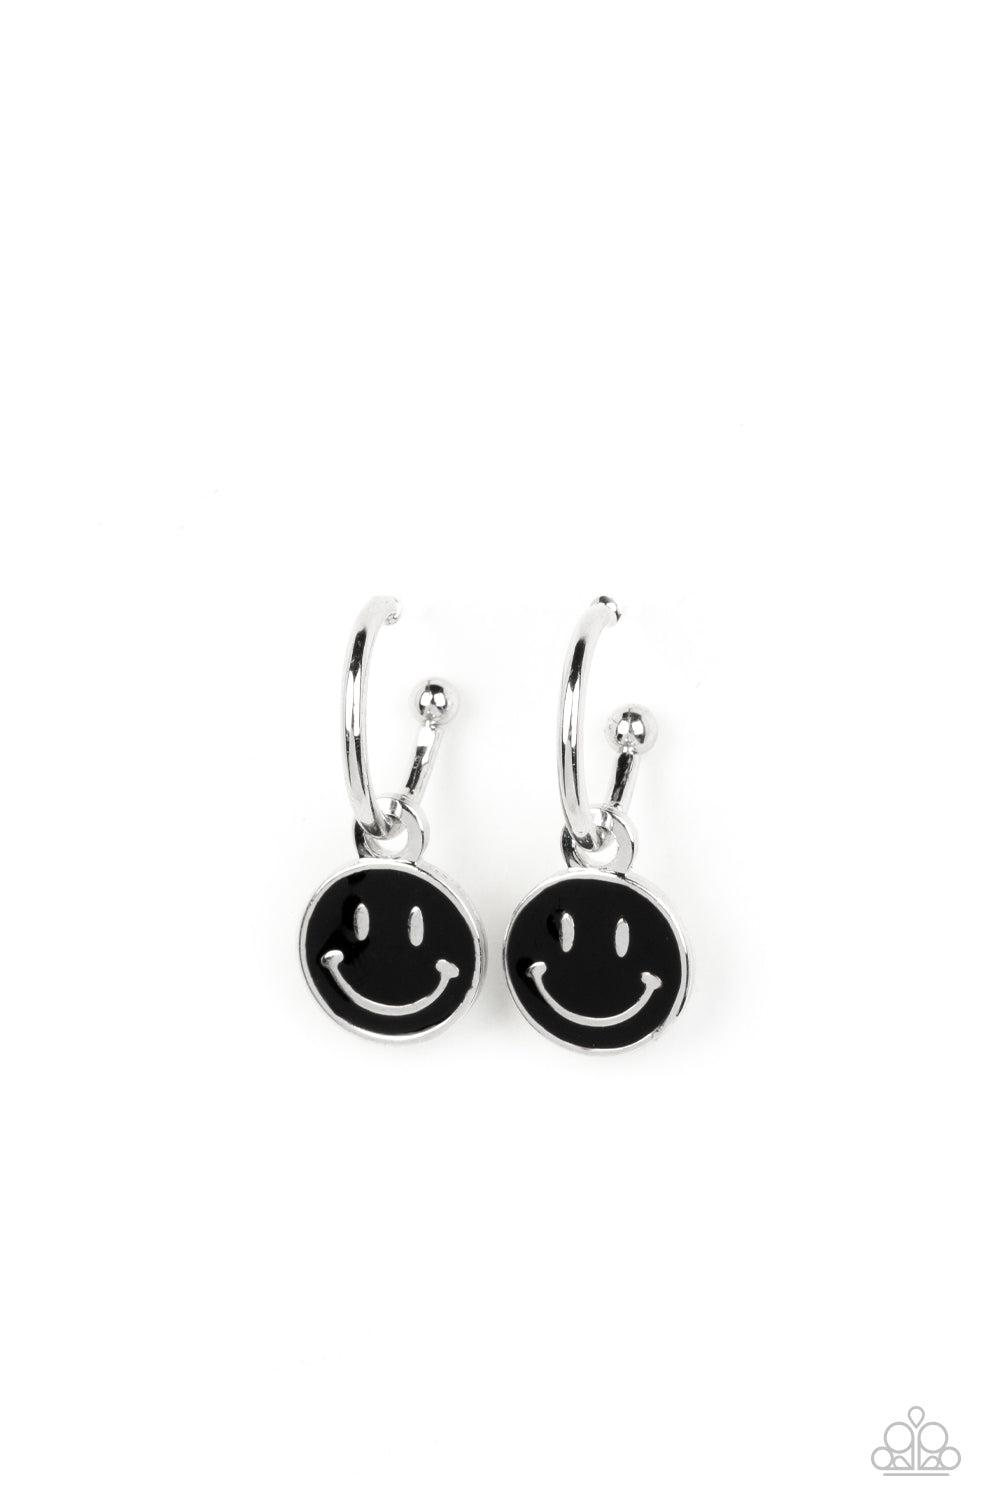 Subtle Smile Black Happy Face Earrings - Paparazzi Accessories- lightbox - CarasShop.com - $5 Jewelry by Cara Jewels